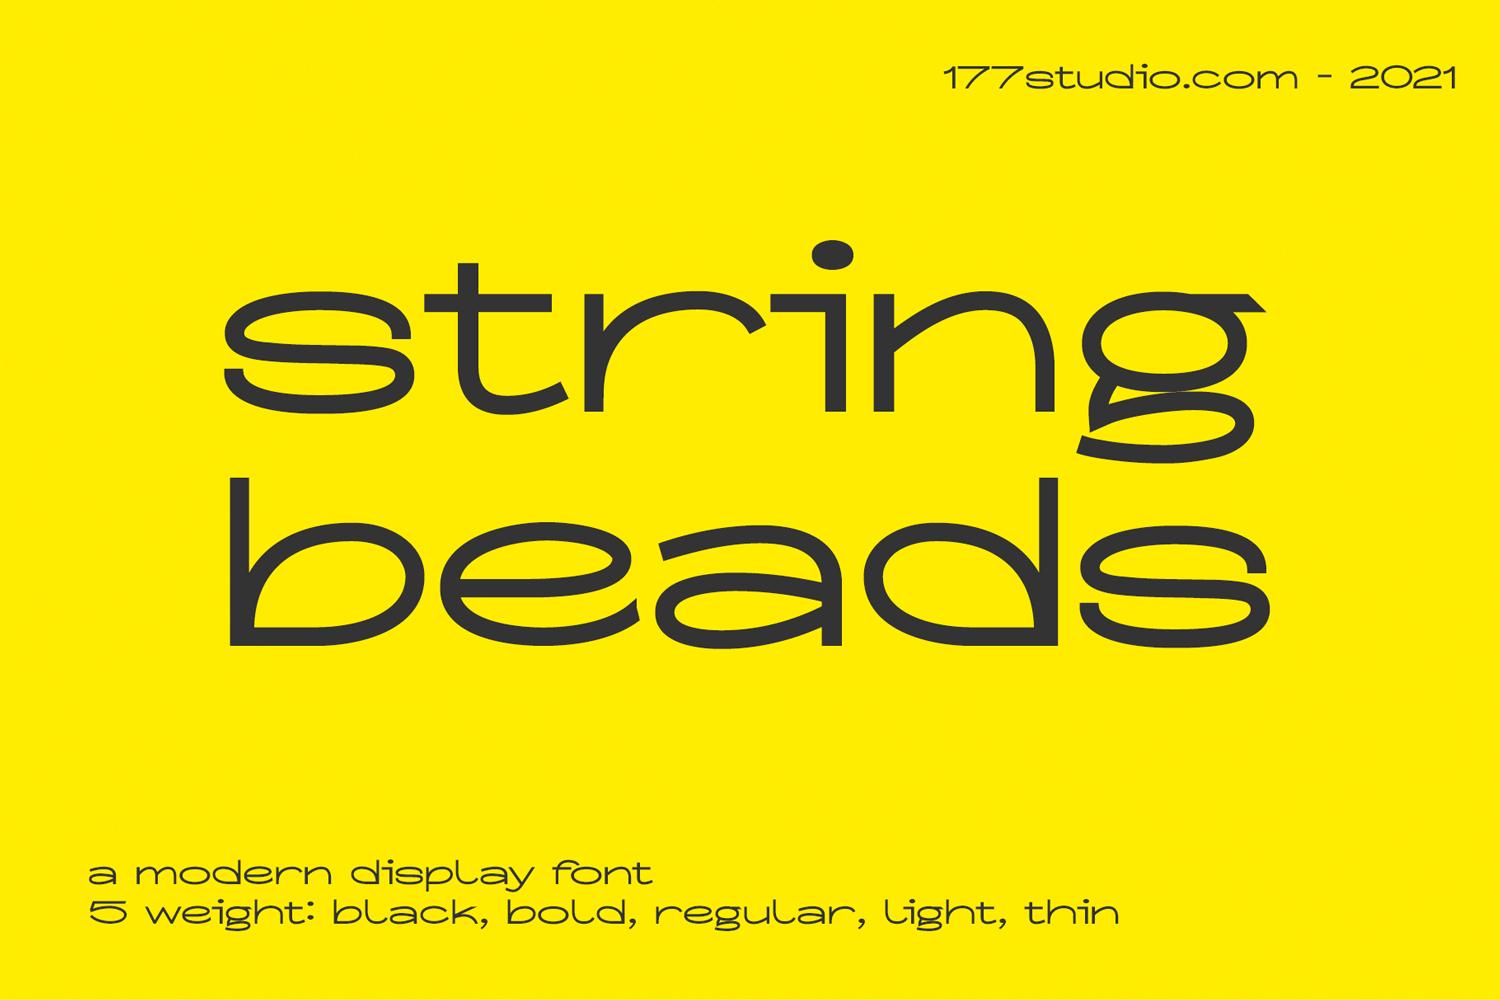 String Beads Font